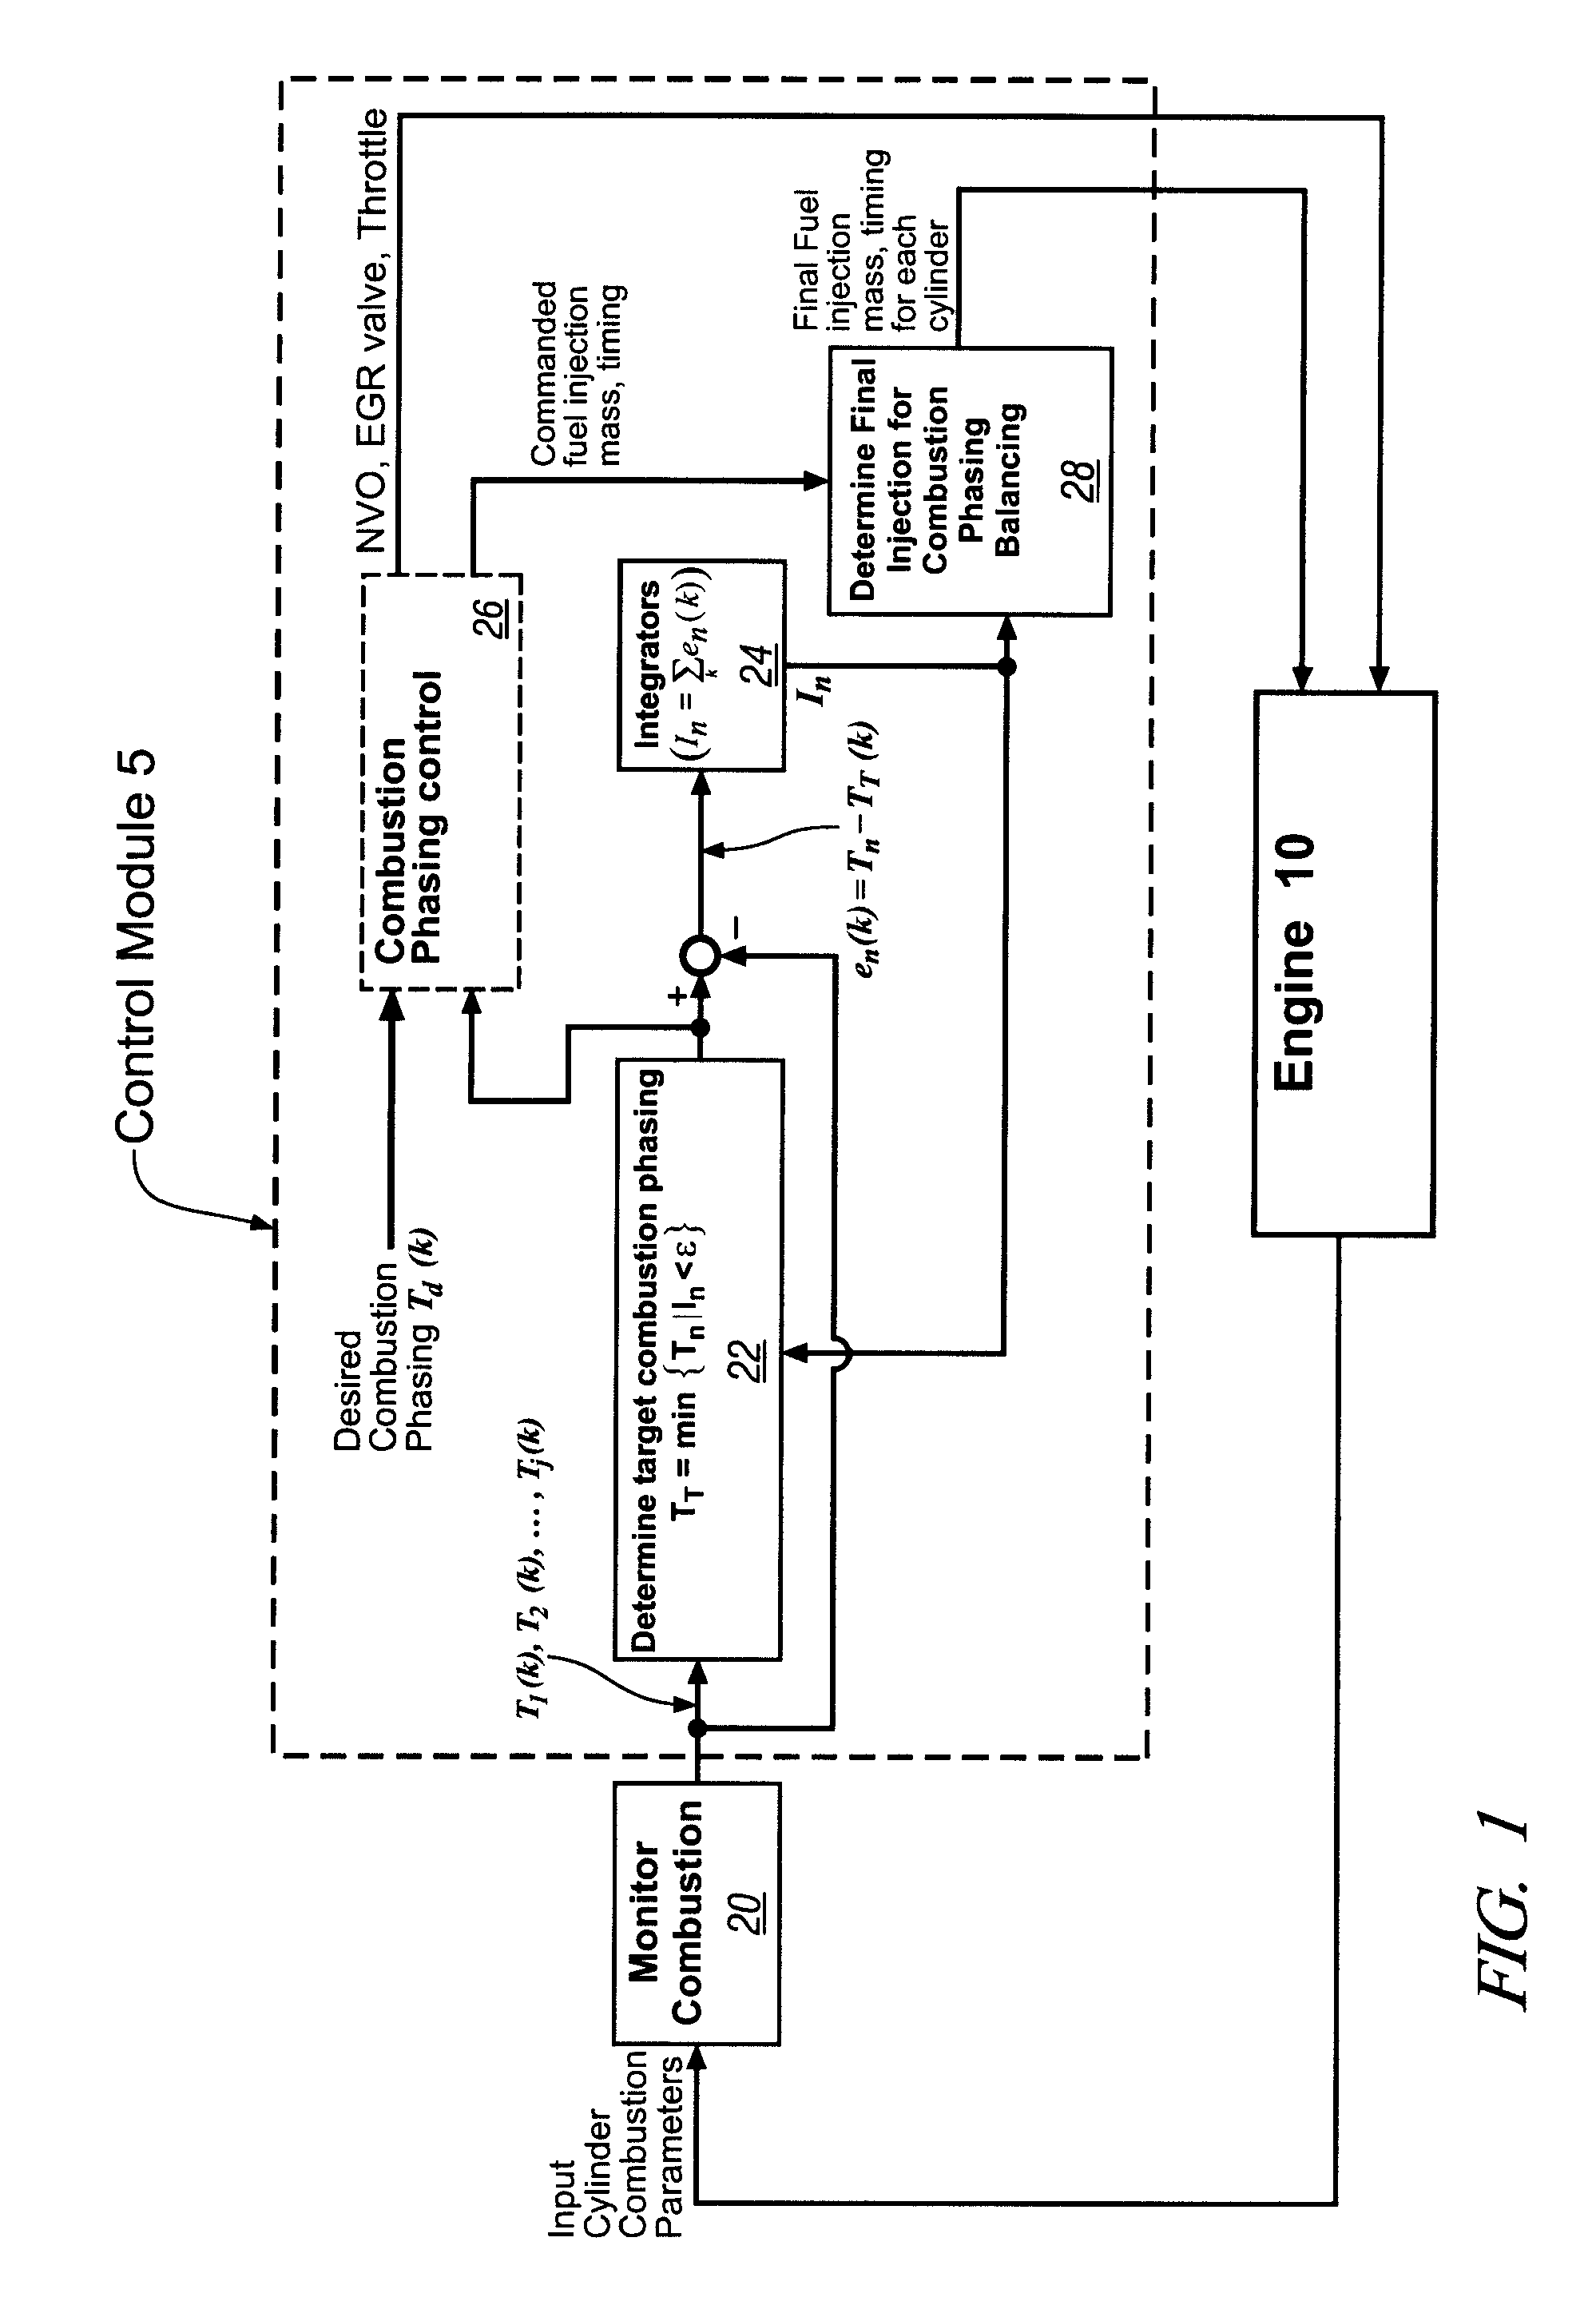 Method and apparatus to control combustion in a multi-cylinder homogeneous charge compression-ignition engine